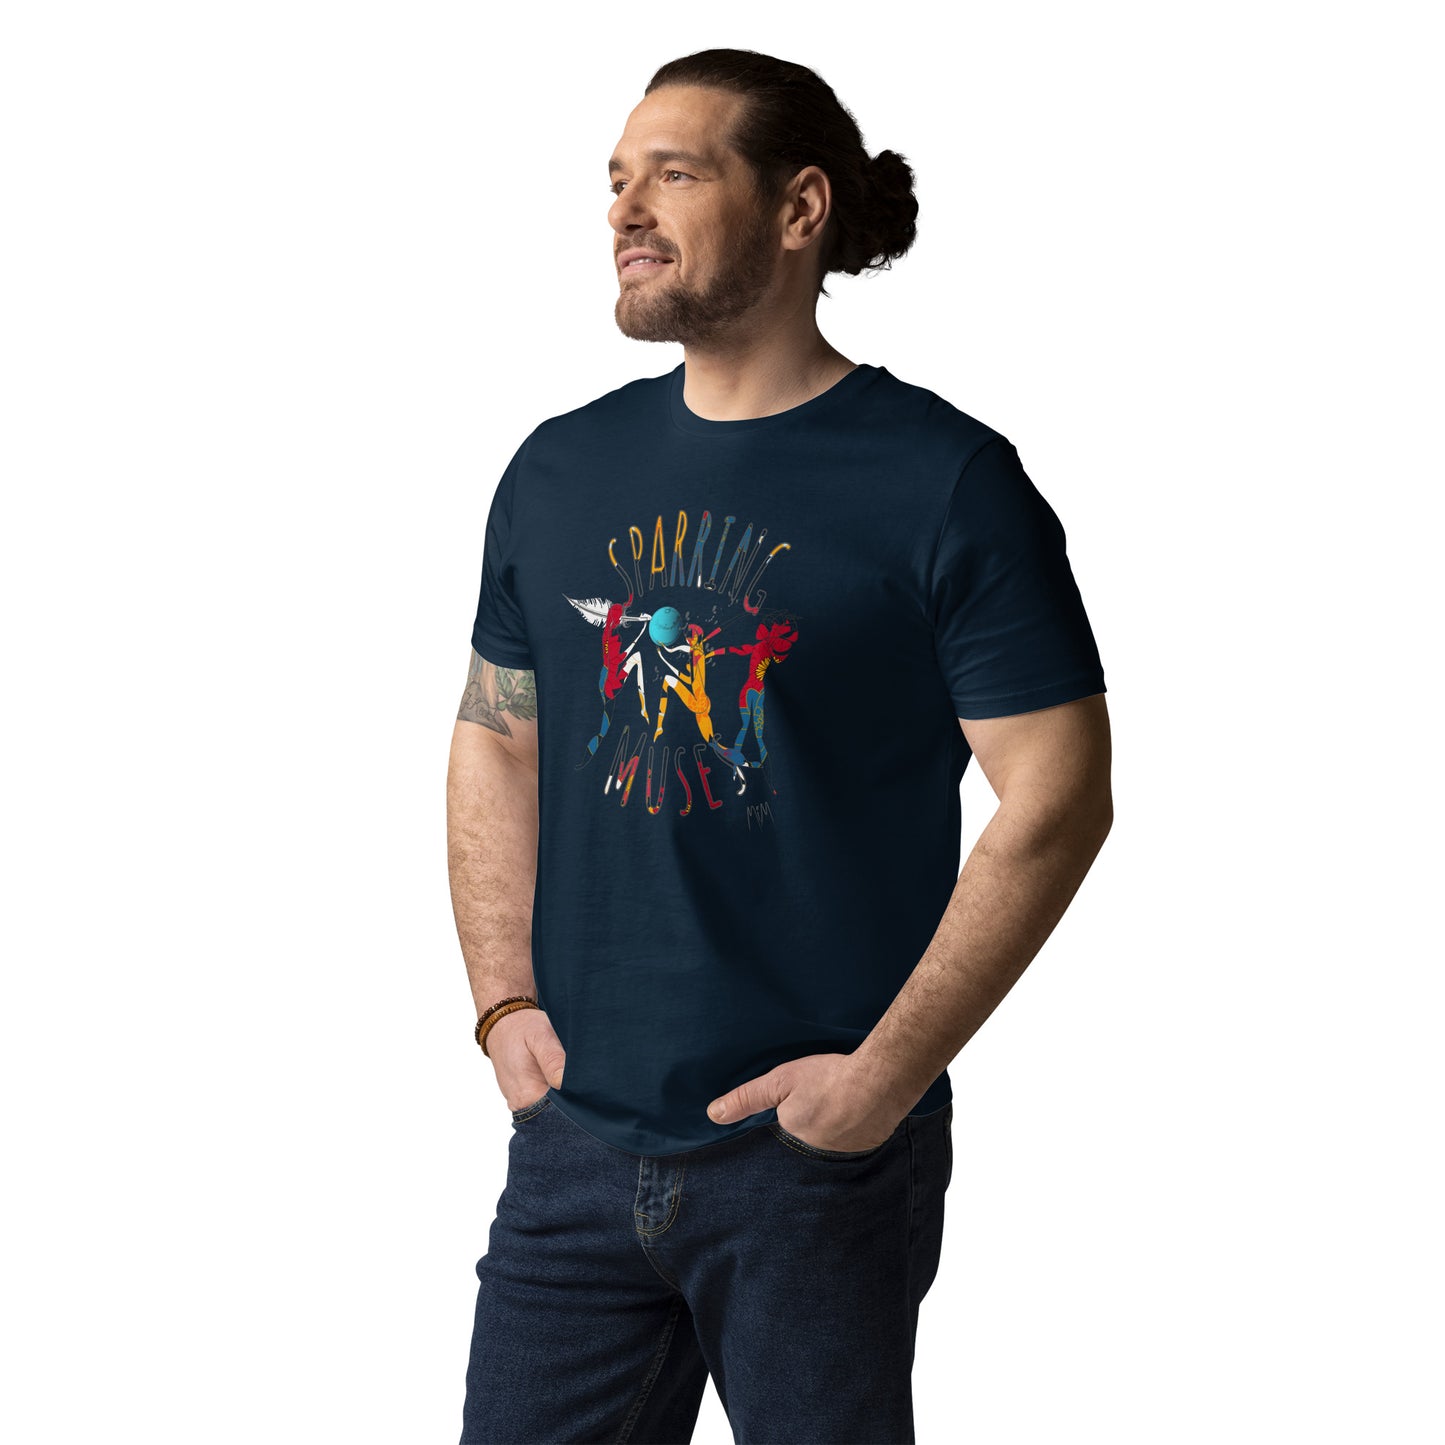 Sparring Muses: Unisex Organic Cotton T-Shirt